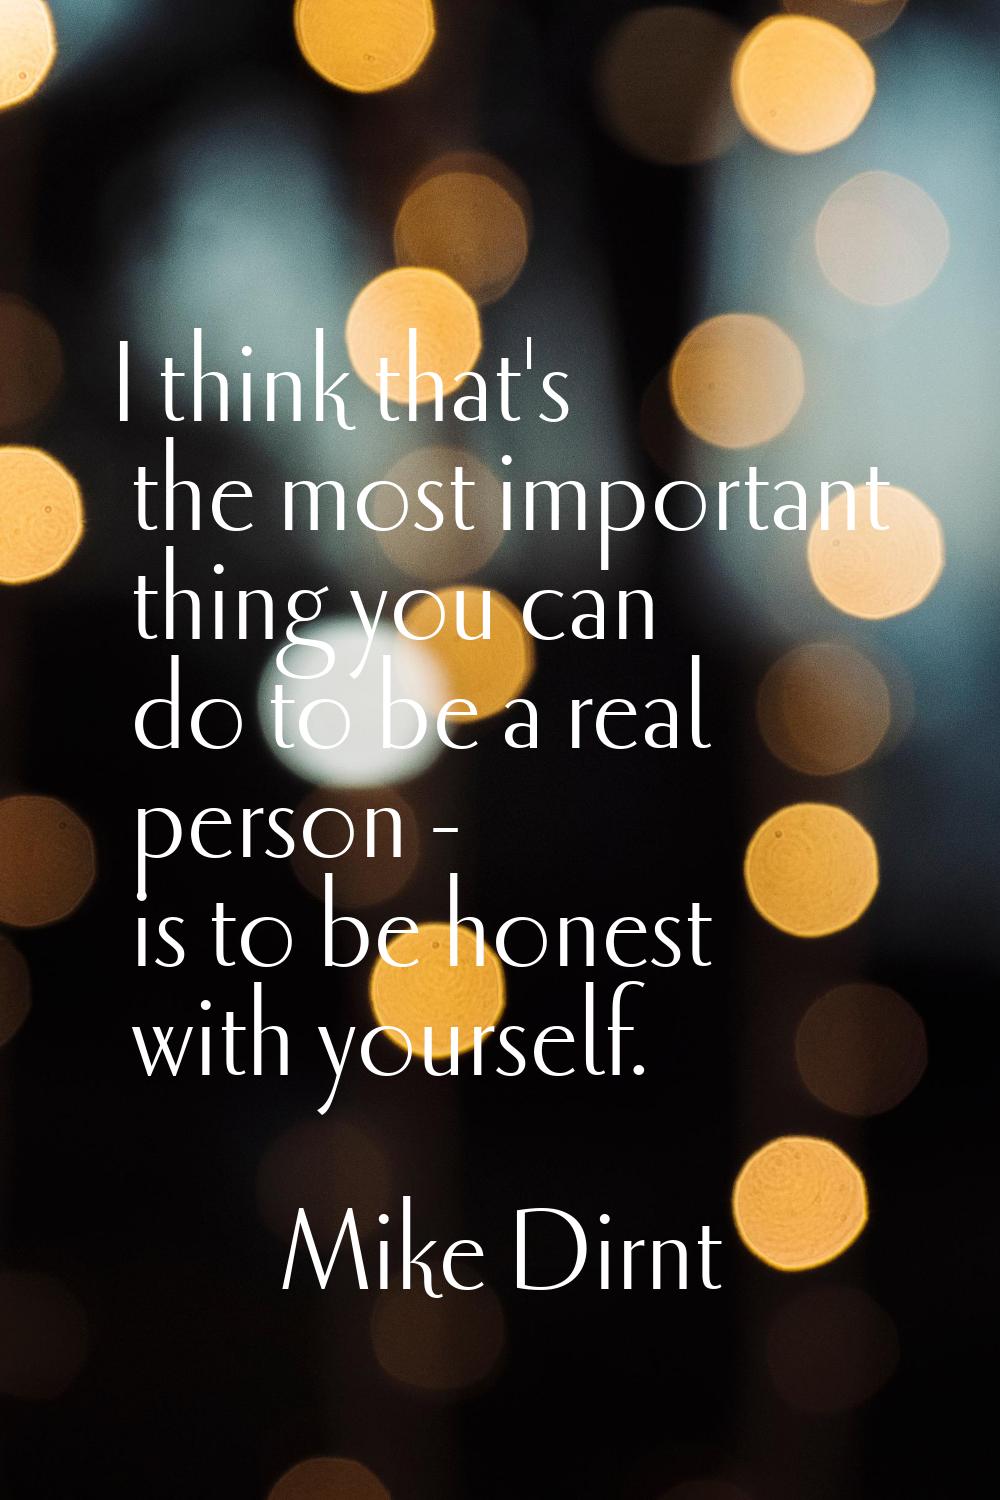 I think that's the most important thing you can do to be a real person - is to be honest with yours